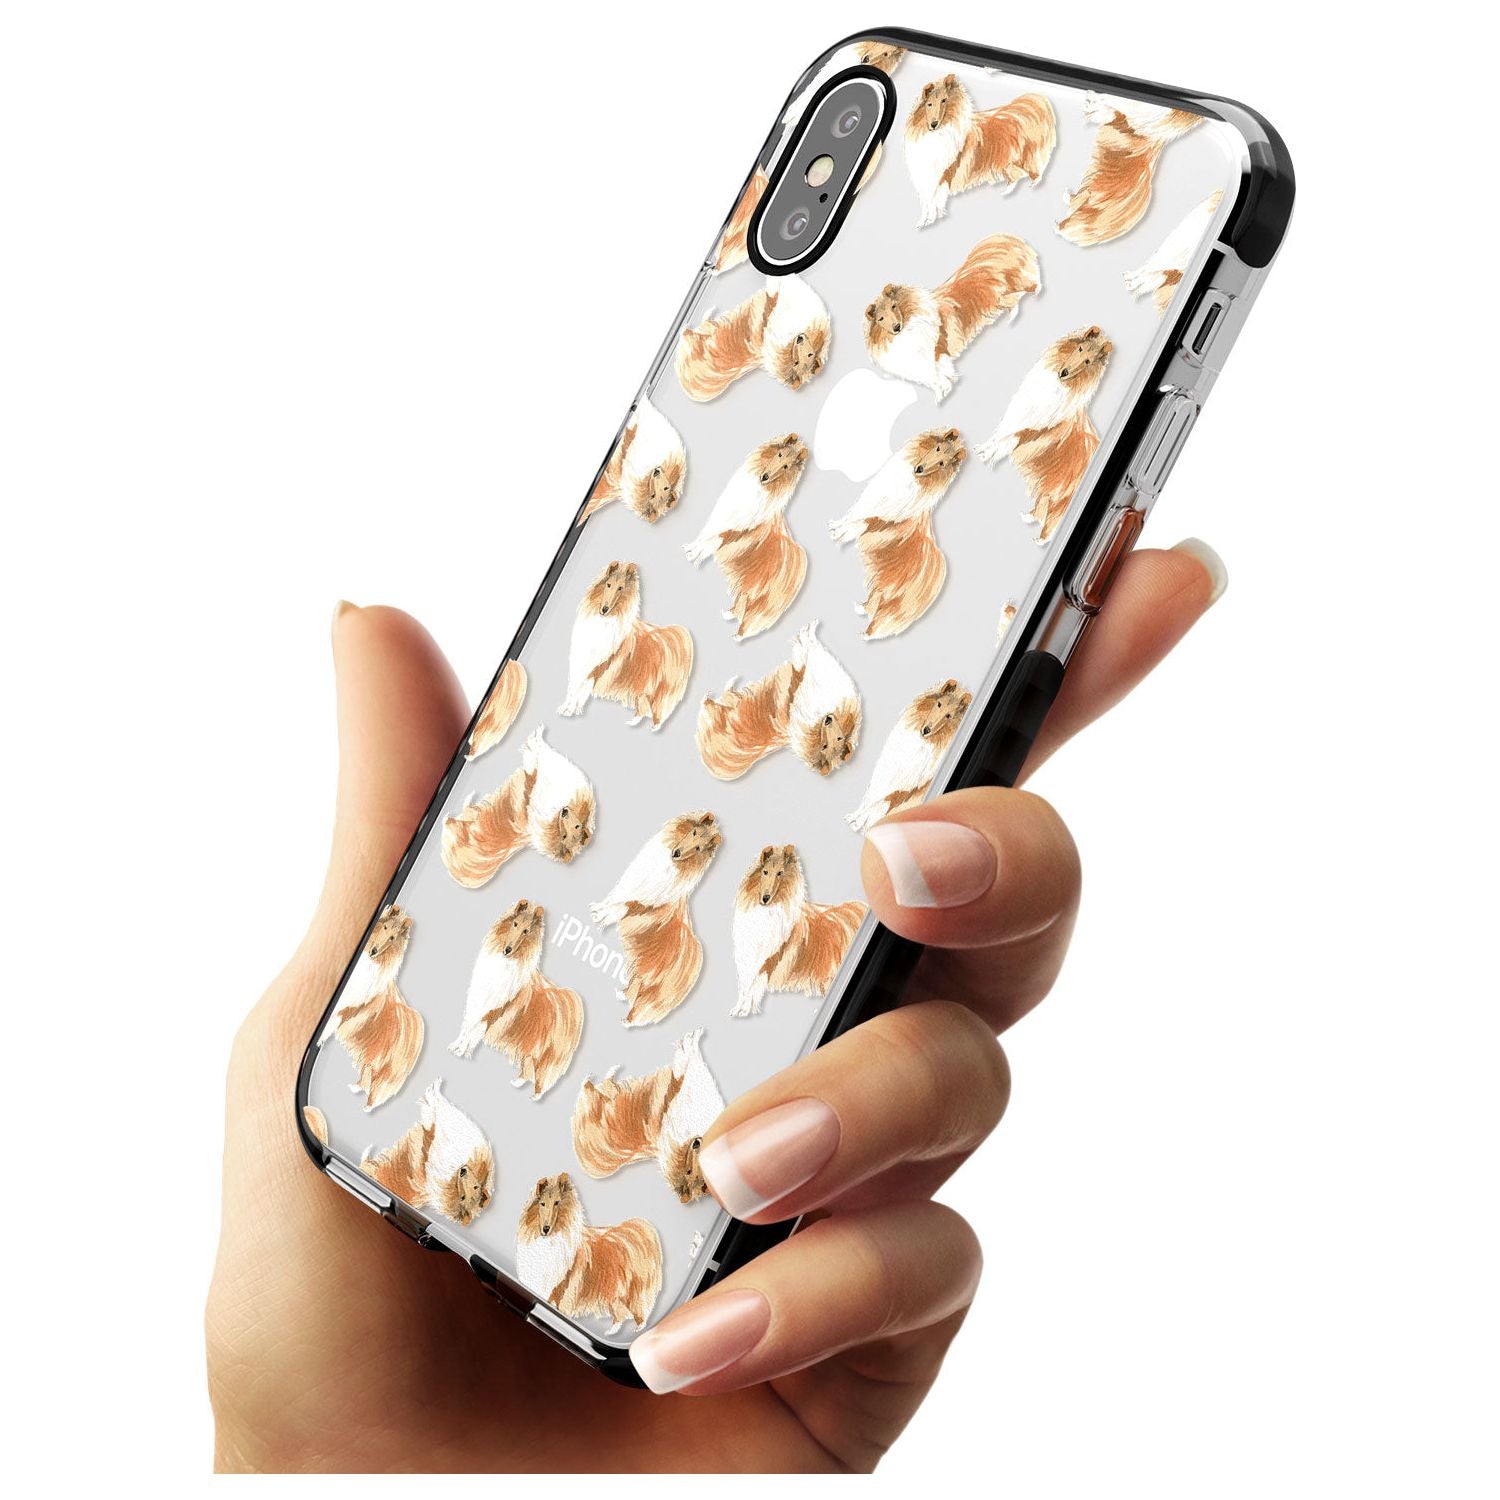 Rough Collie Watercolour Dog Pattern Black Impact Phone Case for iPhone X XS Max XR